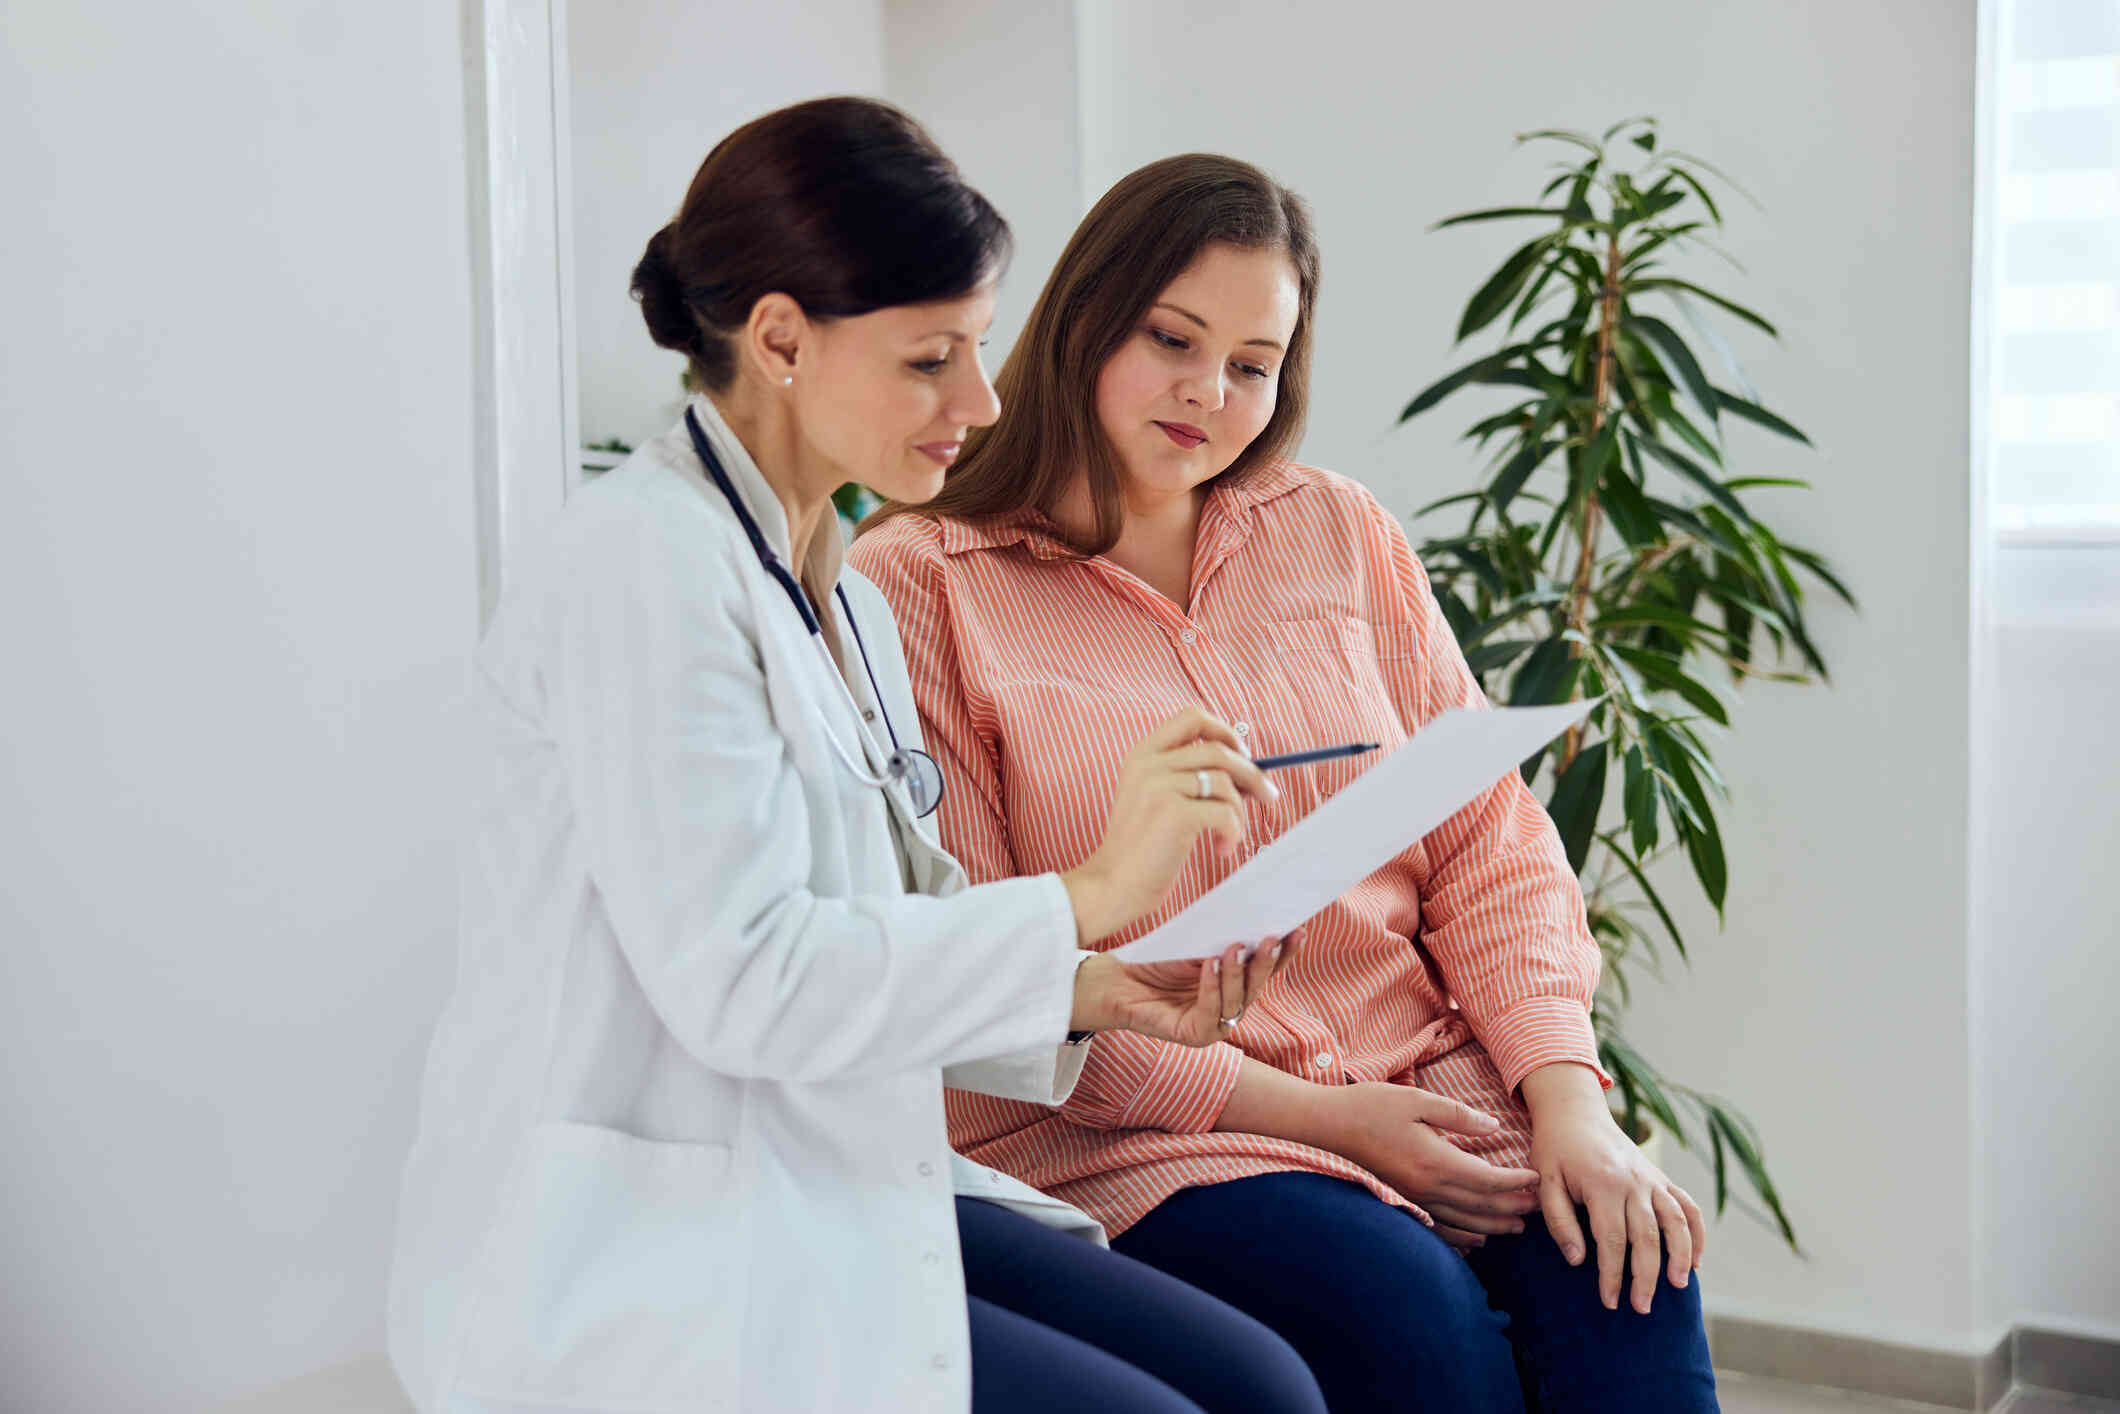 A woman in a pink top sits next to her female doctor while the doctor shows her some information on a piece of paper.